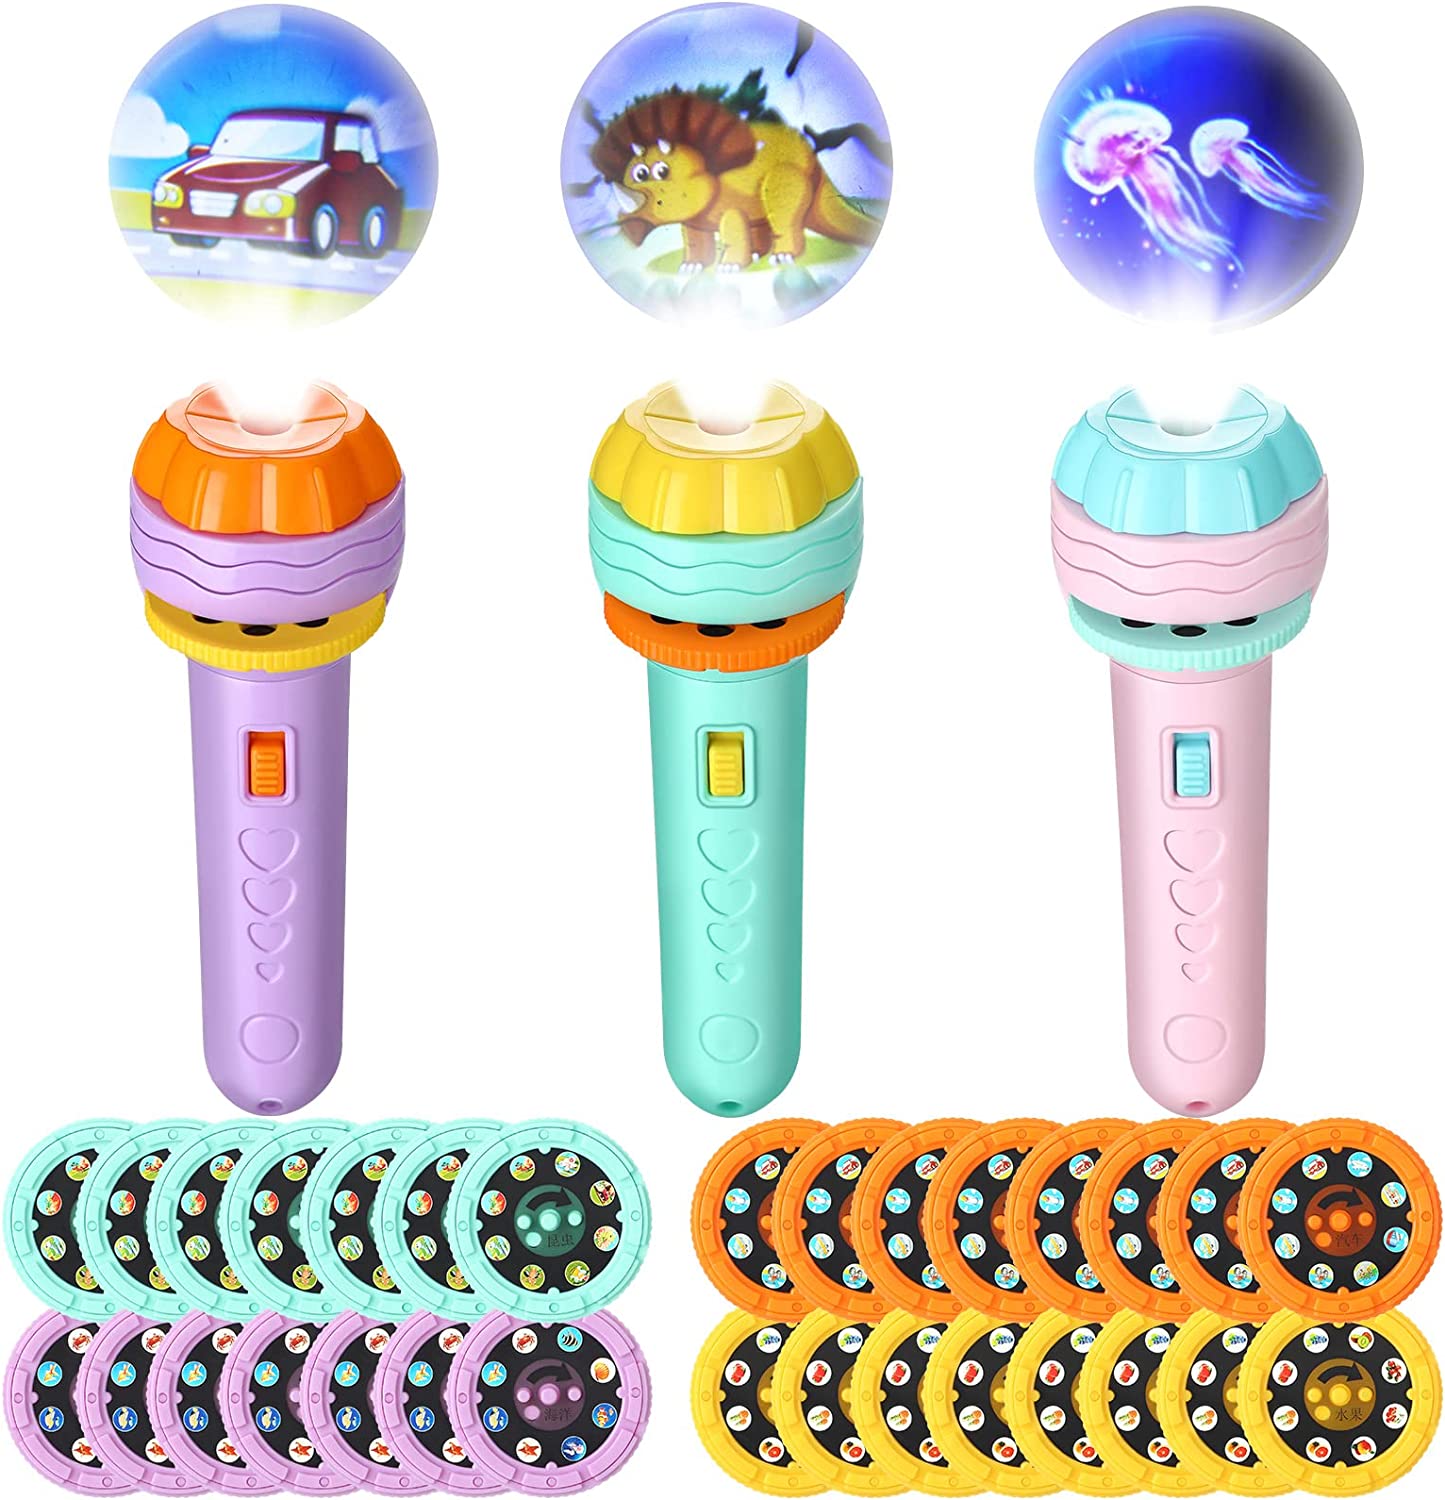 2-in-1 Projector Flashlight Toy